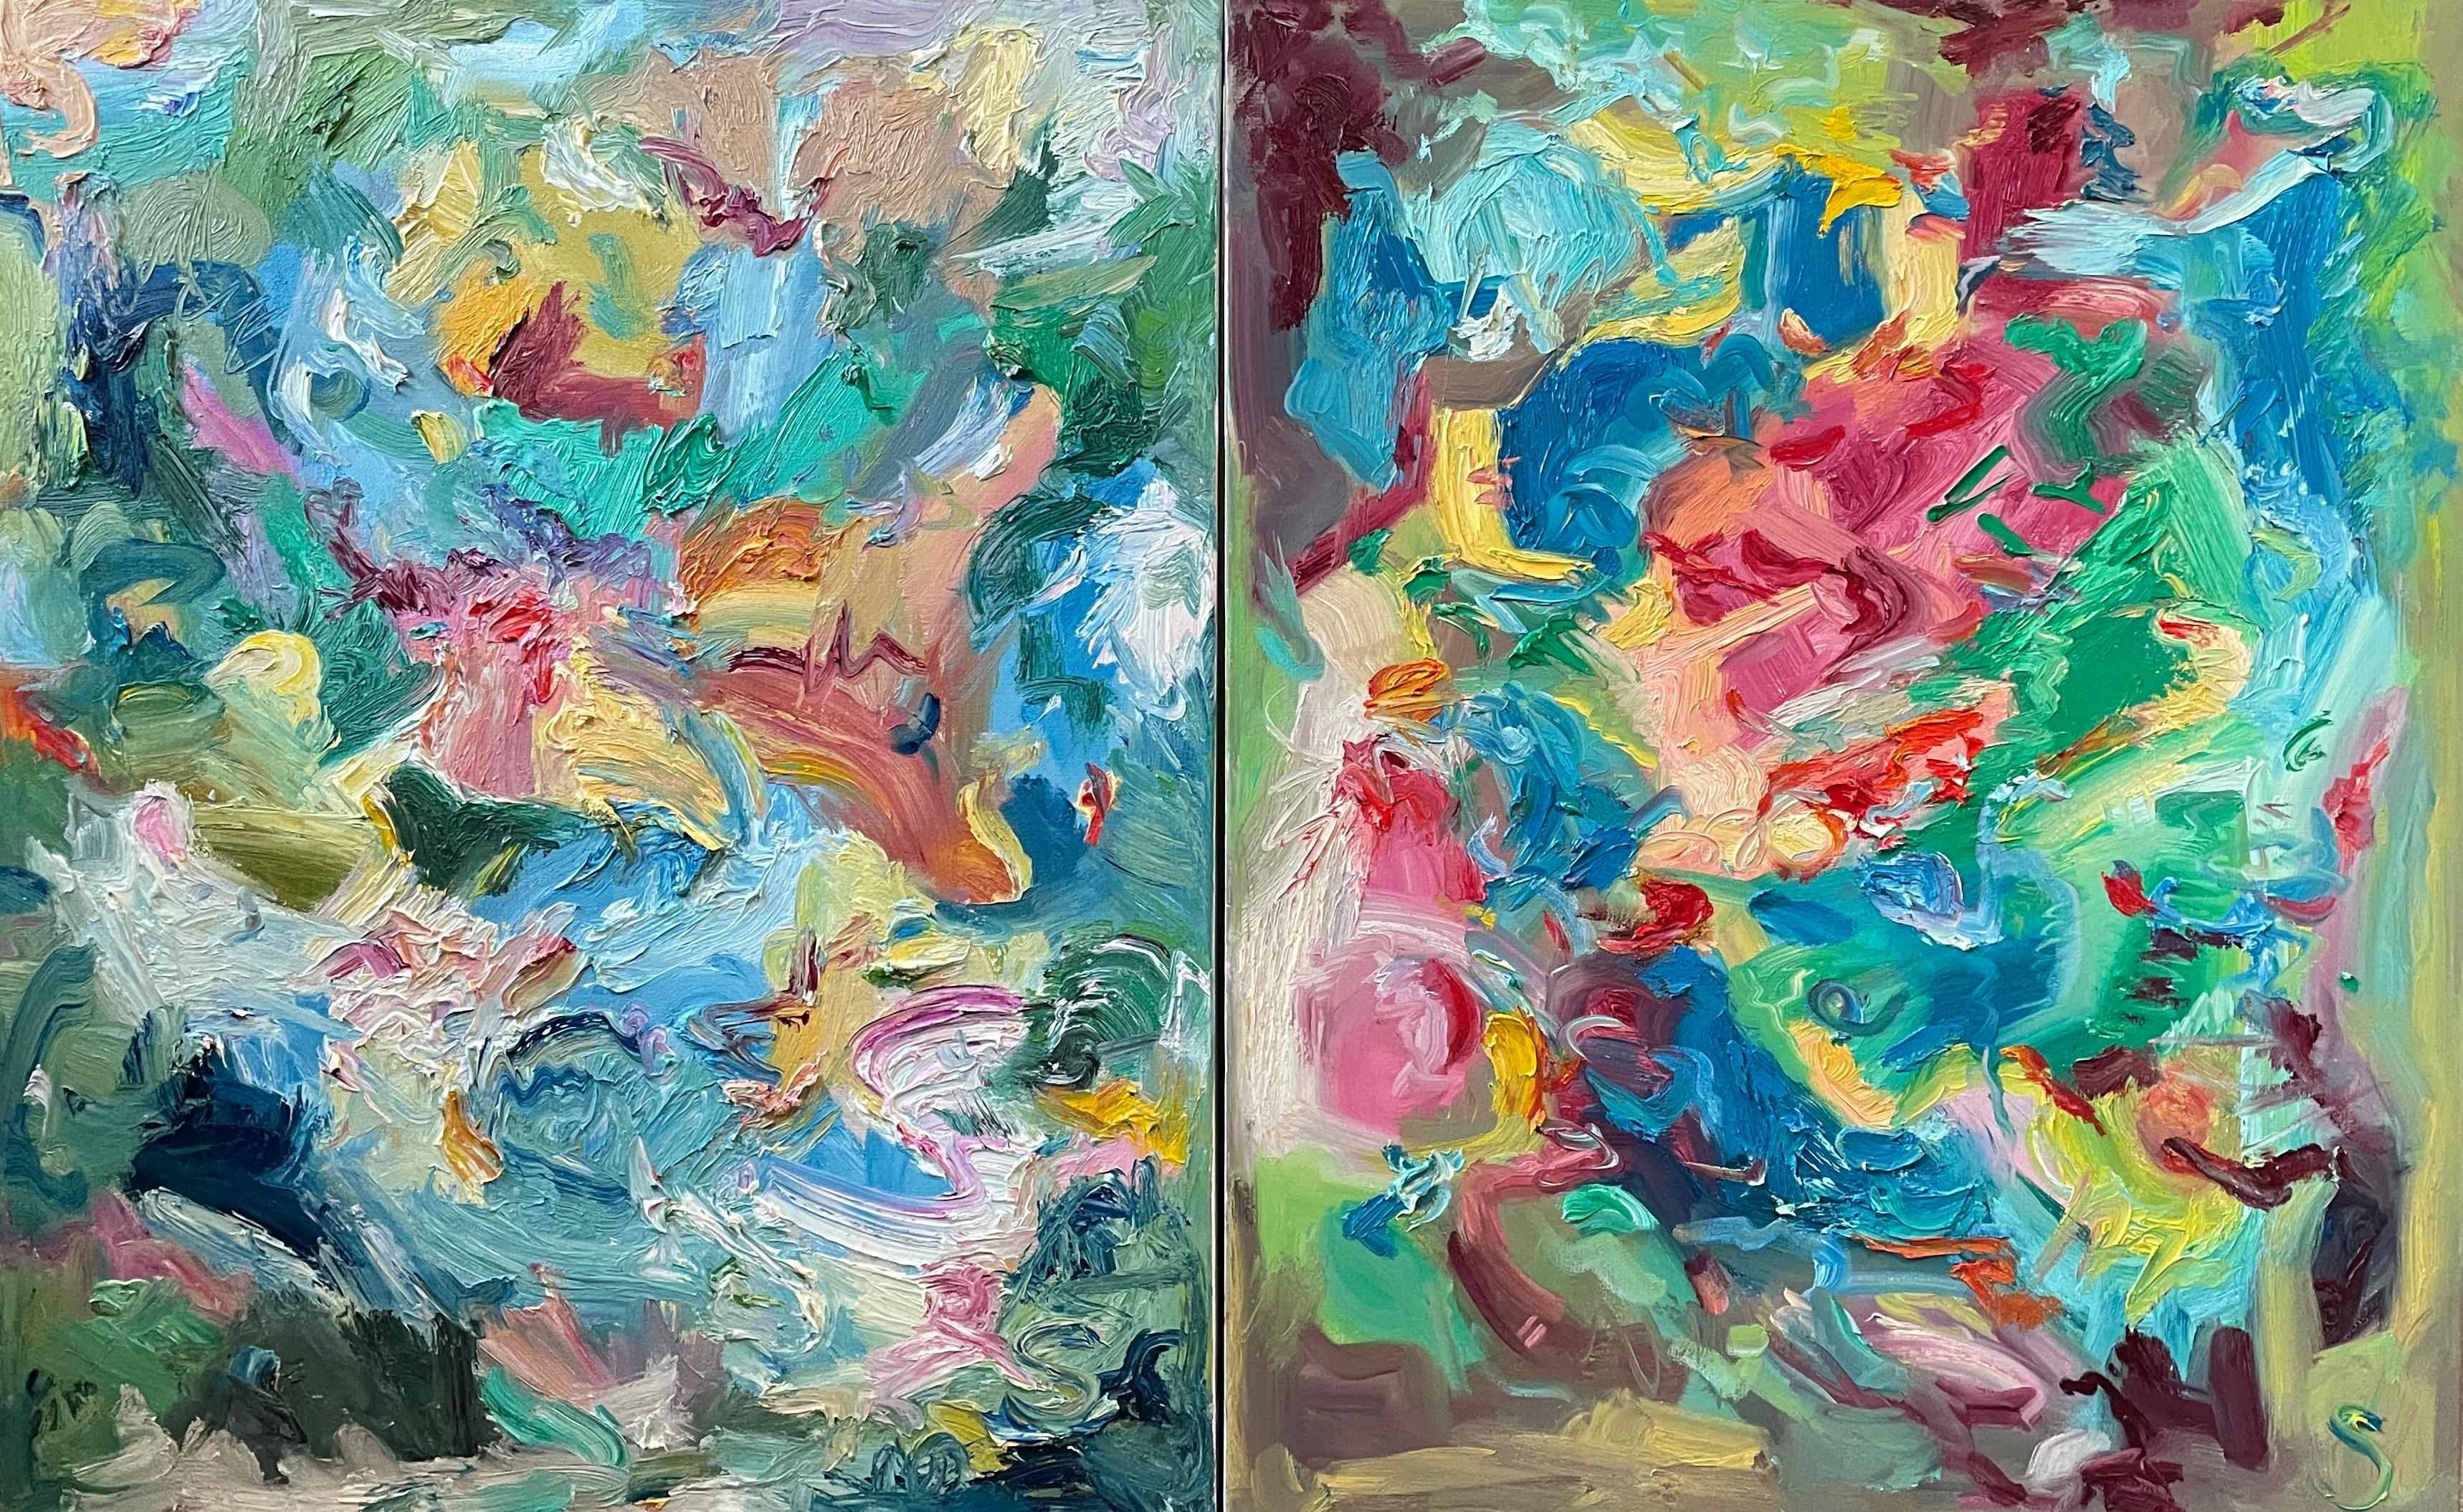 "Joy 1 & 2" by Sveta Hessler is a captivating 30" x 48" diptych oil on canvas, bursting with an exuberance that lives up to its title. Each canvas is a riot of colors, where lush greens intertwine with deep blues, radiant reds, and sunlit yellows,